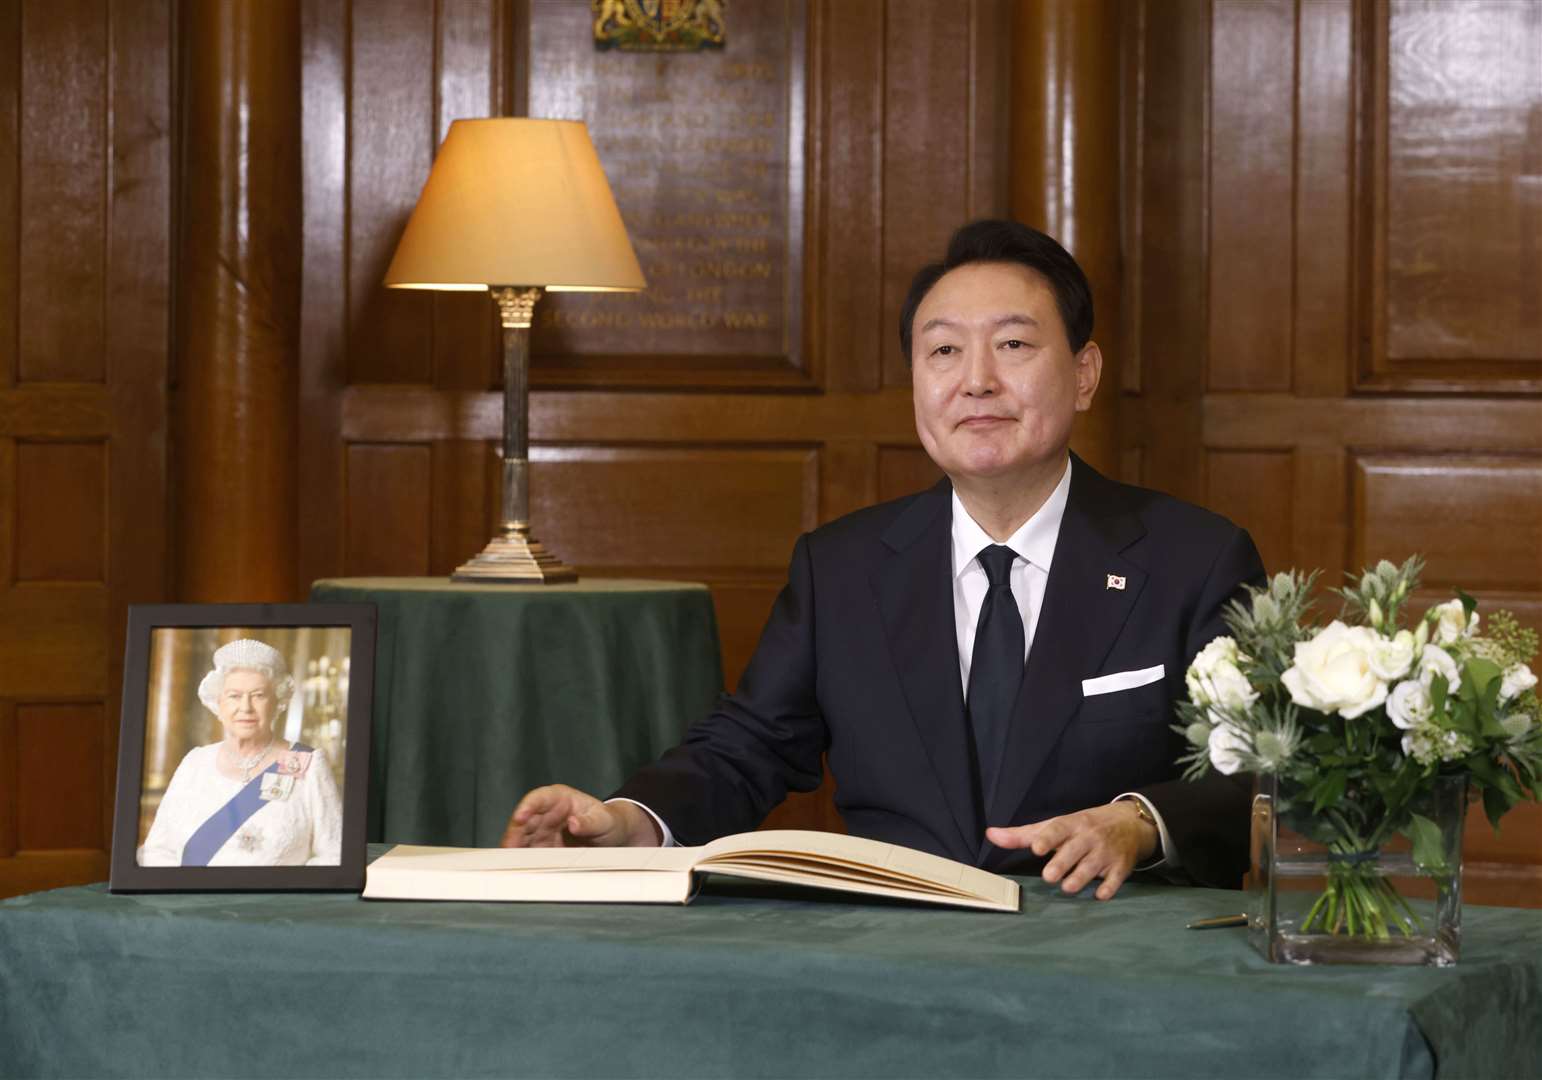 President Yoon Suk Yeol of South Korea signing a book of condolence at Church House in London following the death of Queen Elizabeth II (David Parry/PA)